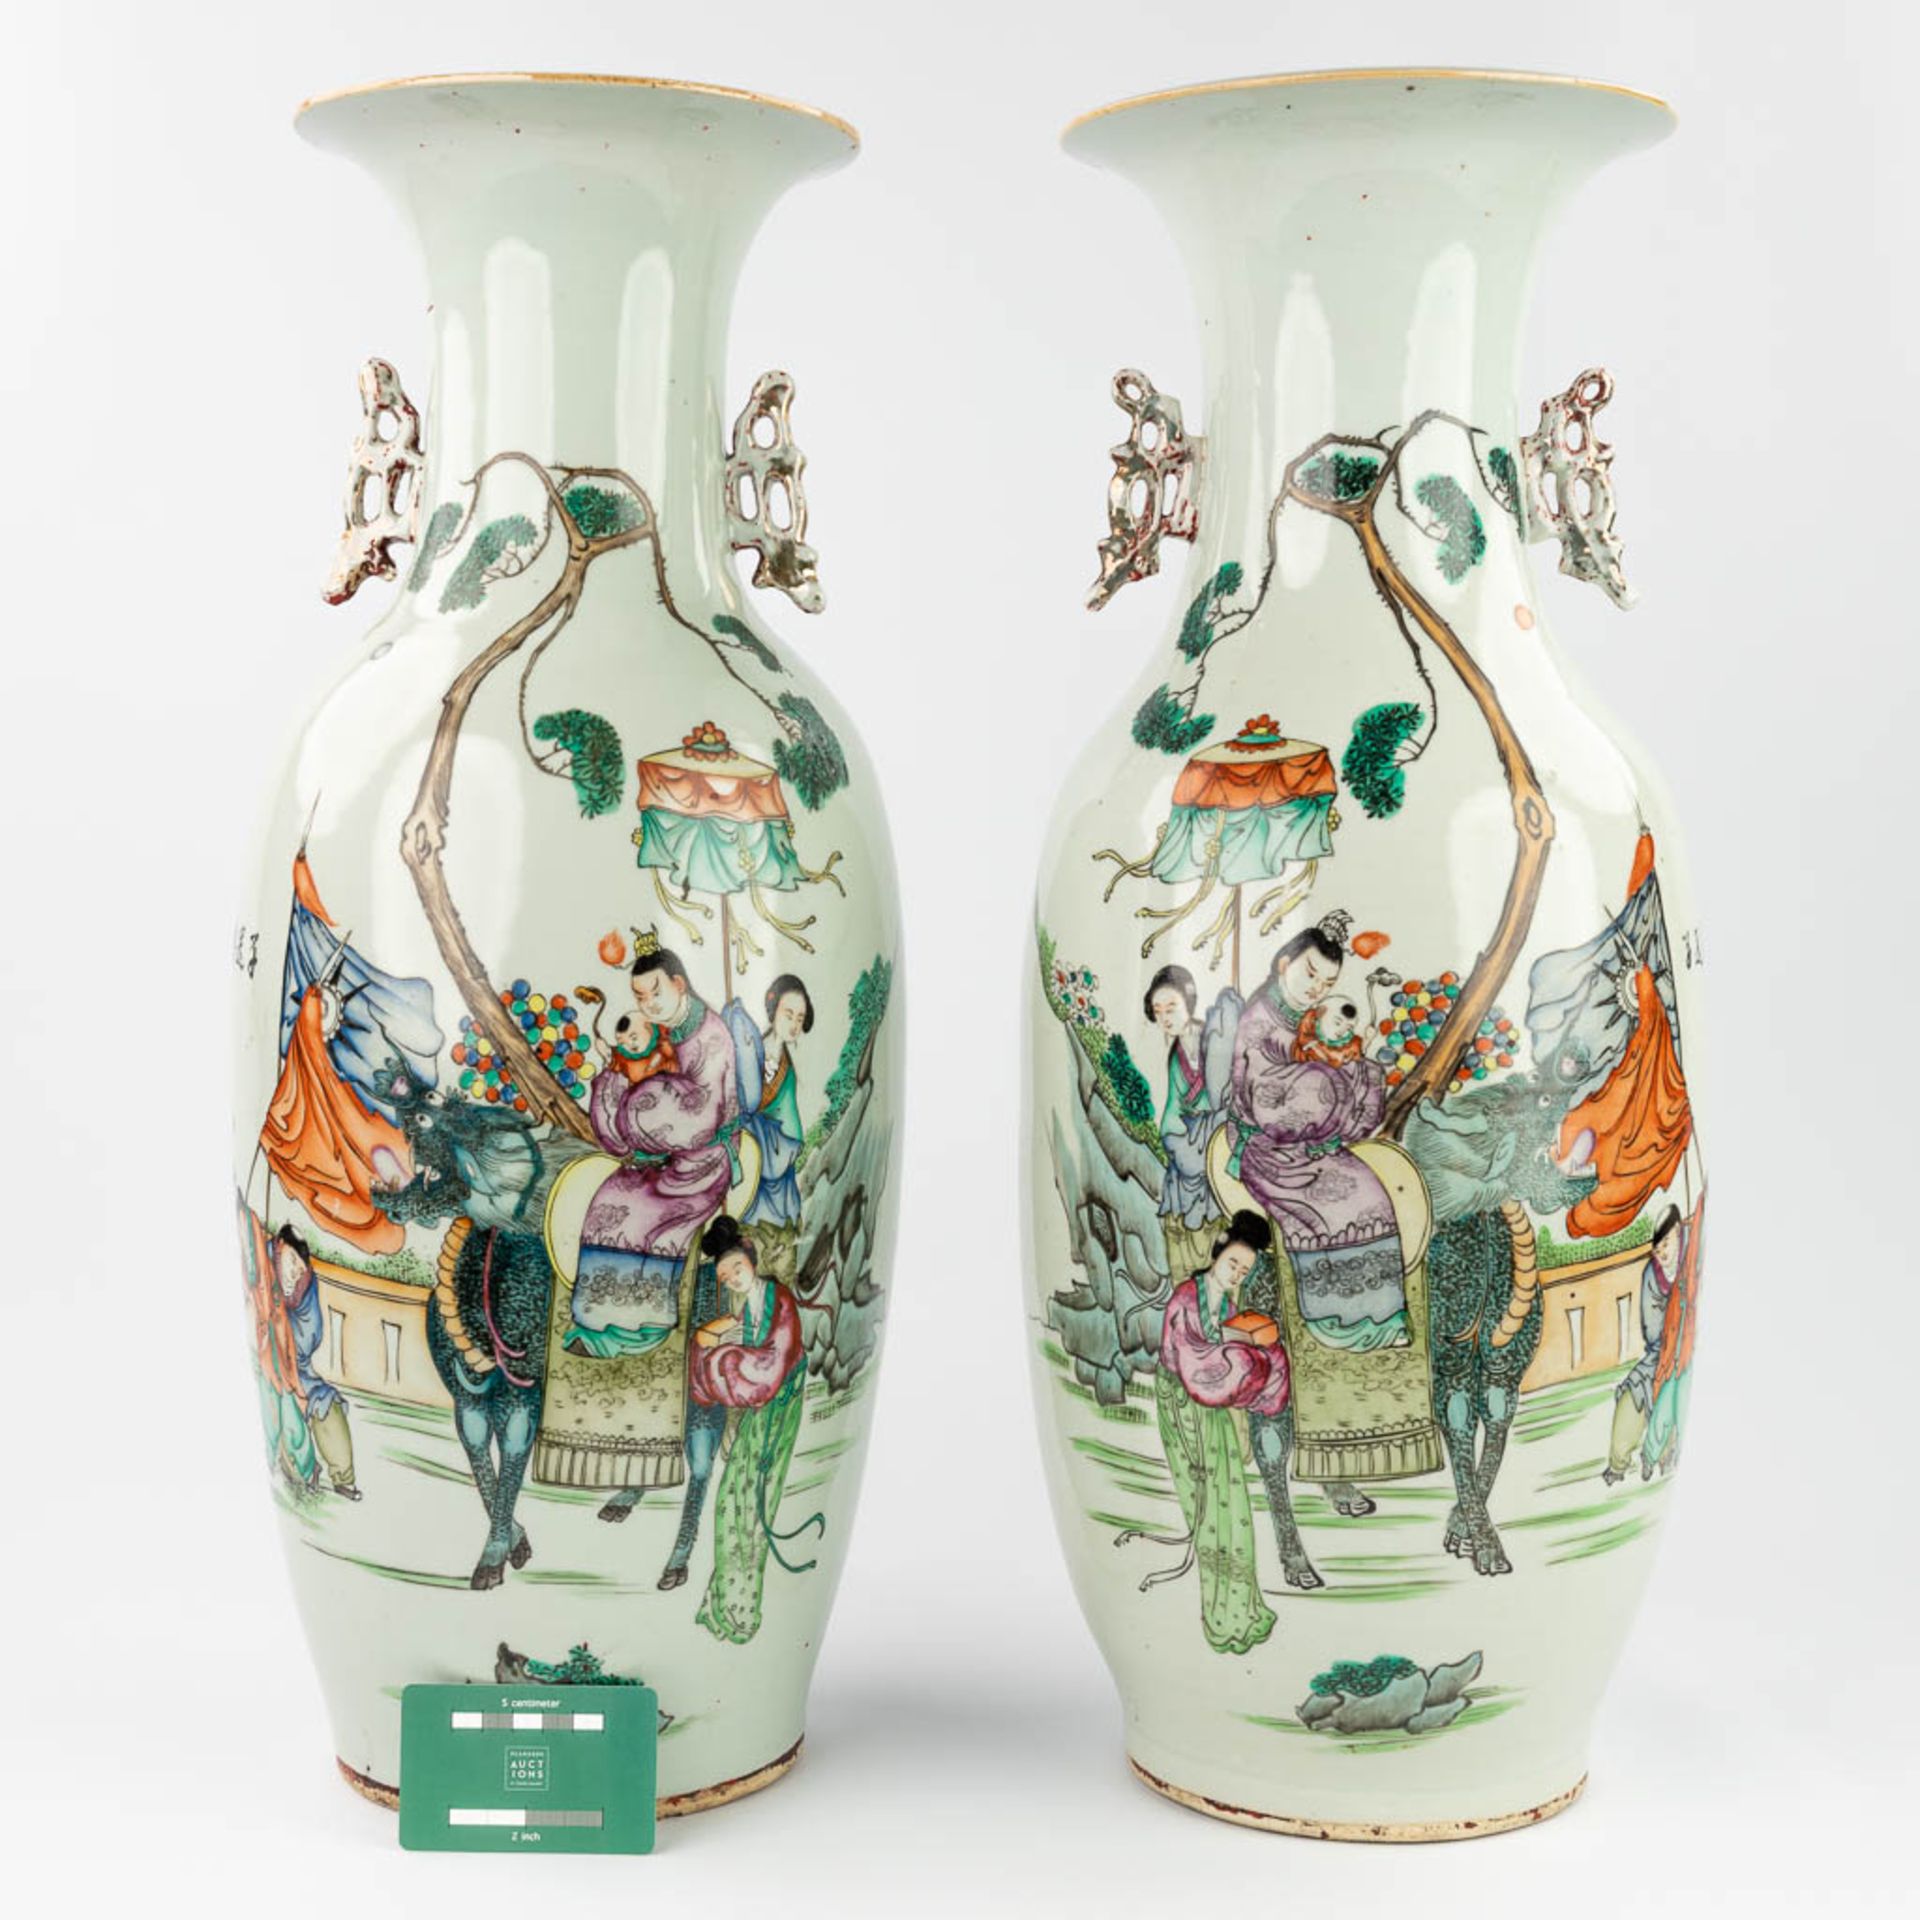 A pair of Chinese vases made of porcelain and decorated with mythological figurines. (58 x 22 cm) - Bild 8 aus 13